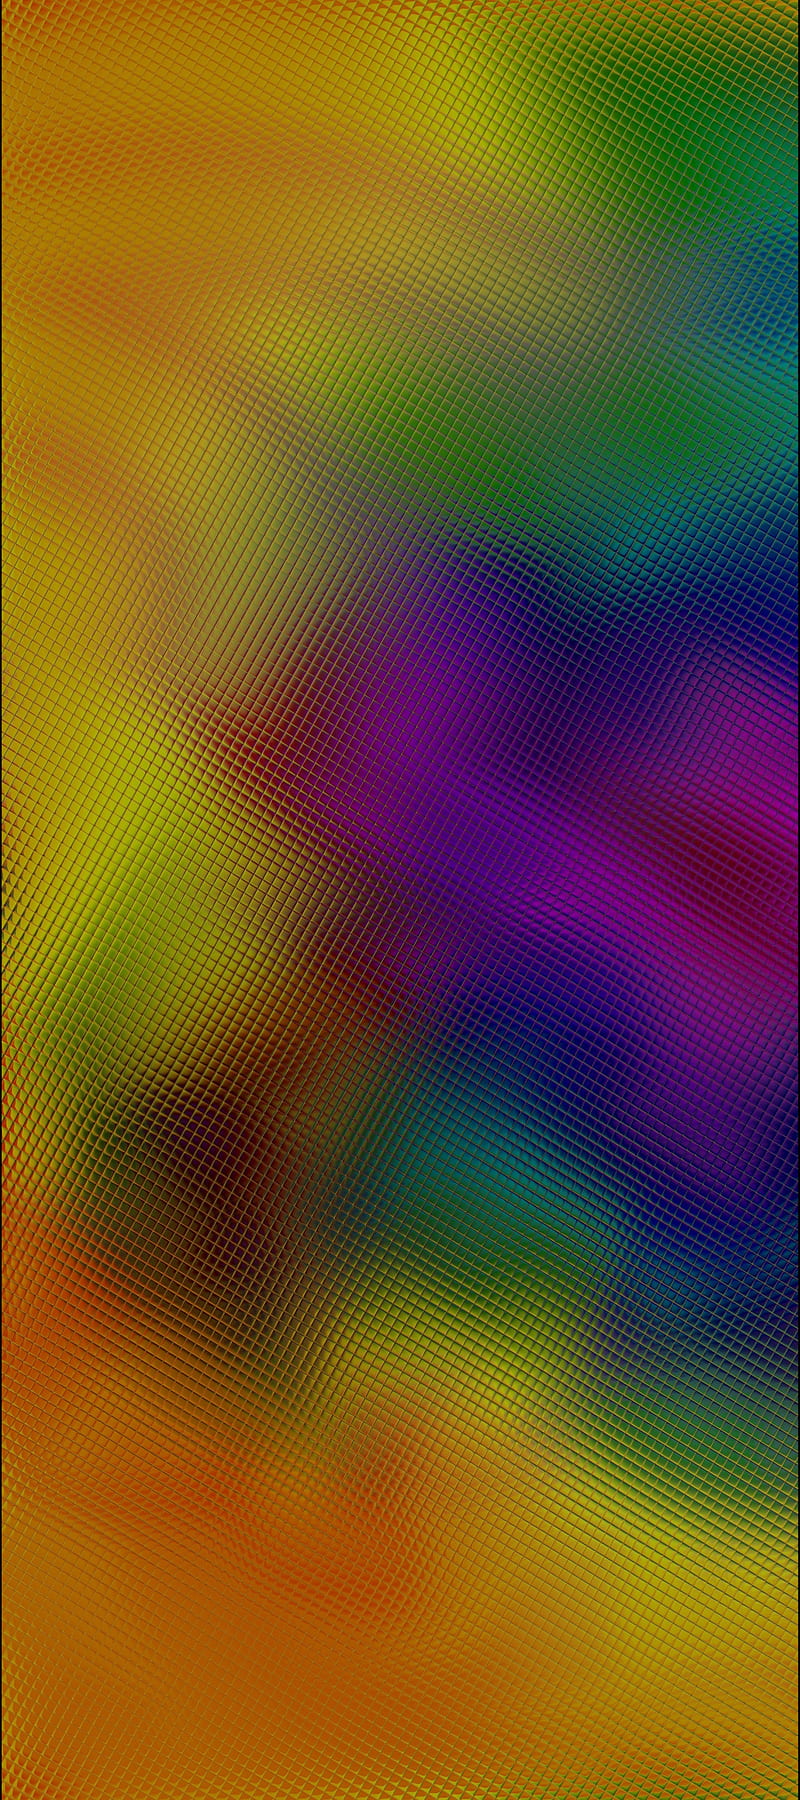 Colorfull A50, 2020, carbon, colors, druffix, feel good, galaxy, glass, home screen, HD phone wallpaper